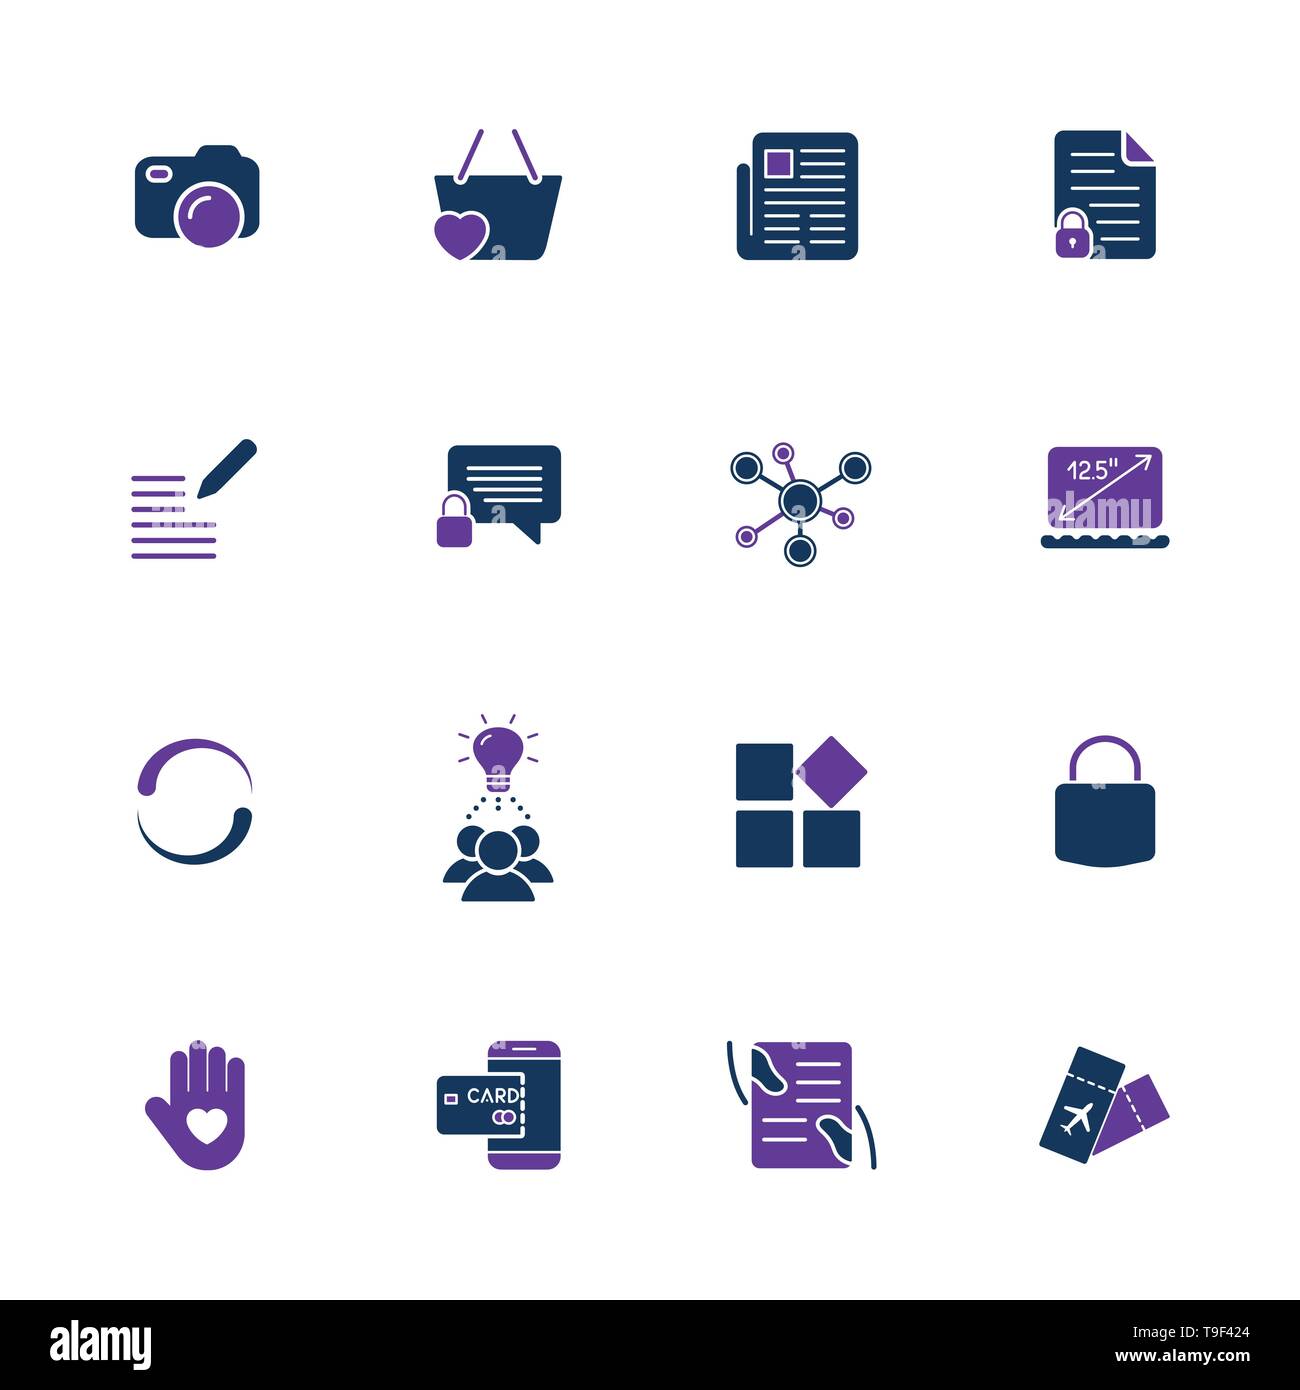 Style and clean icons pack for webdesign or mobile design. Stock Vector